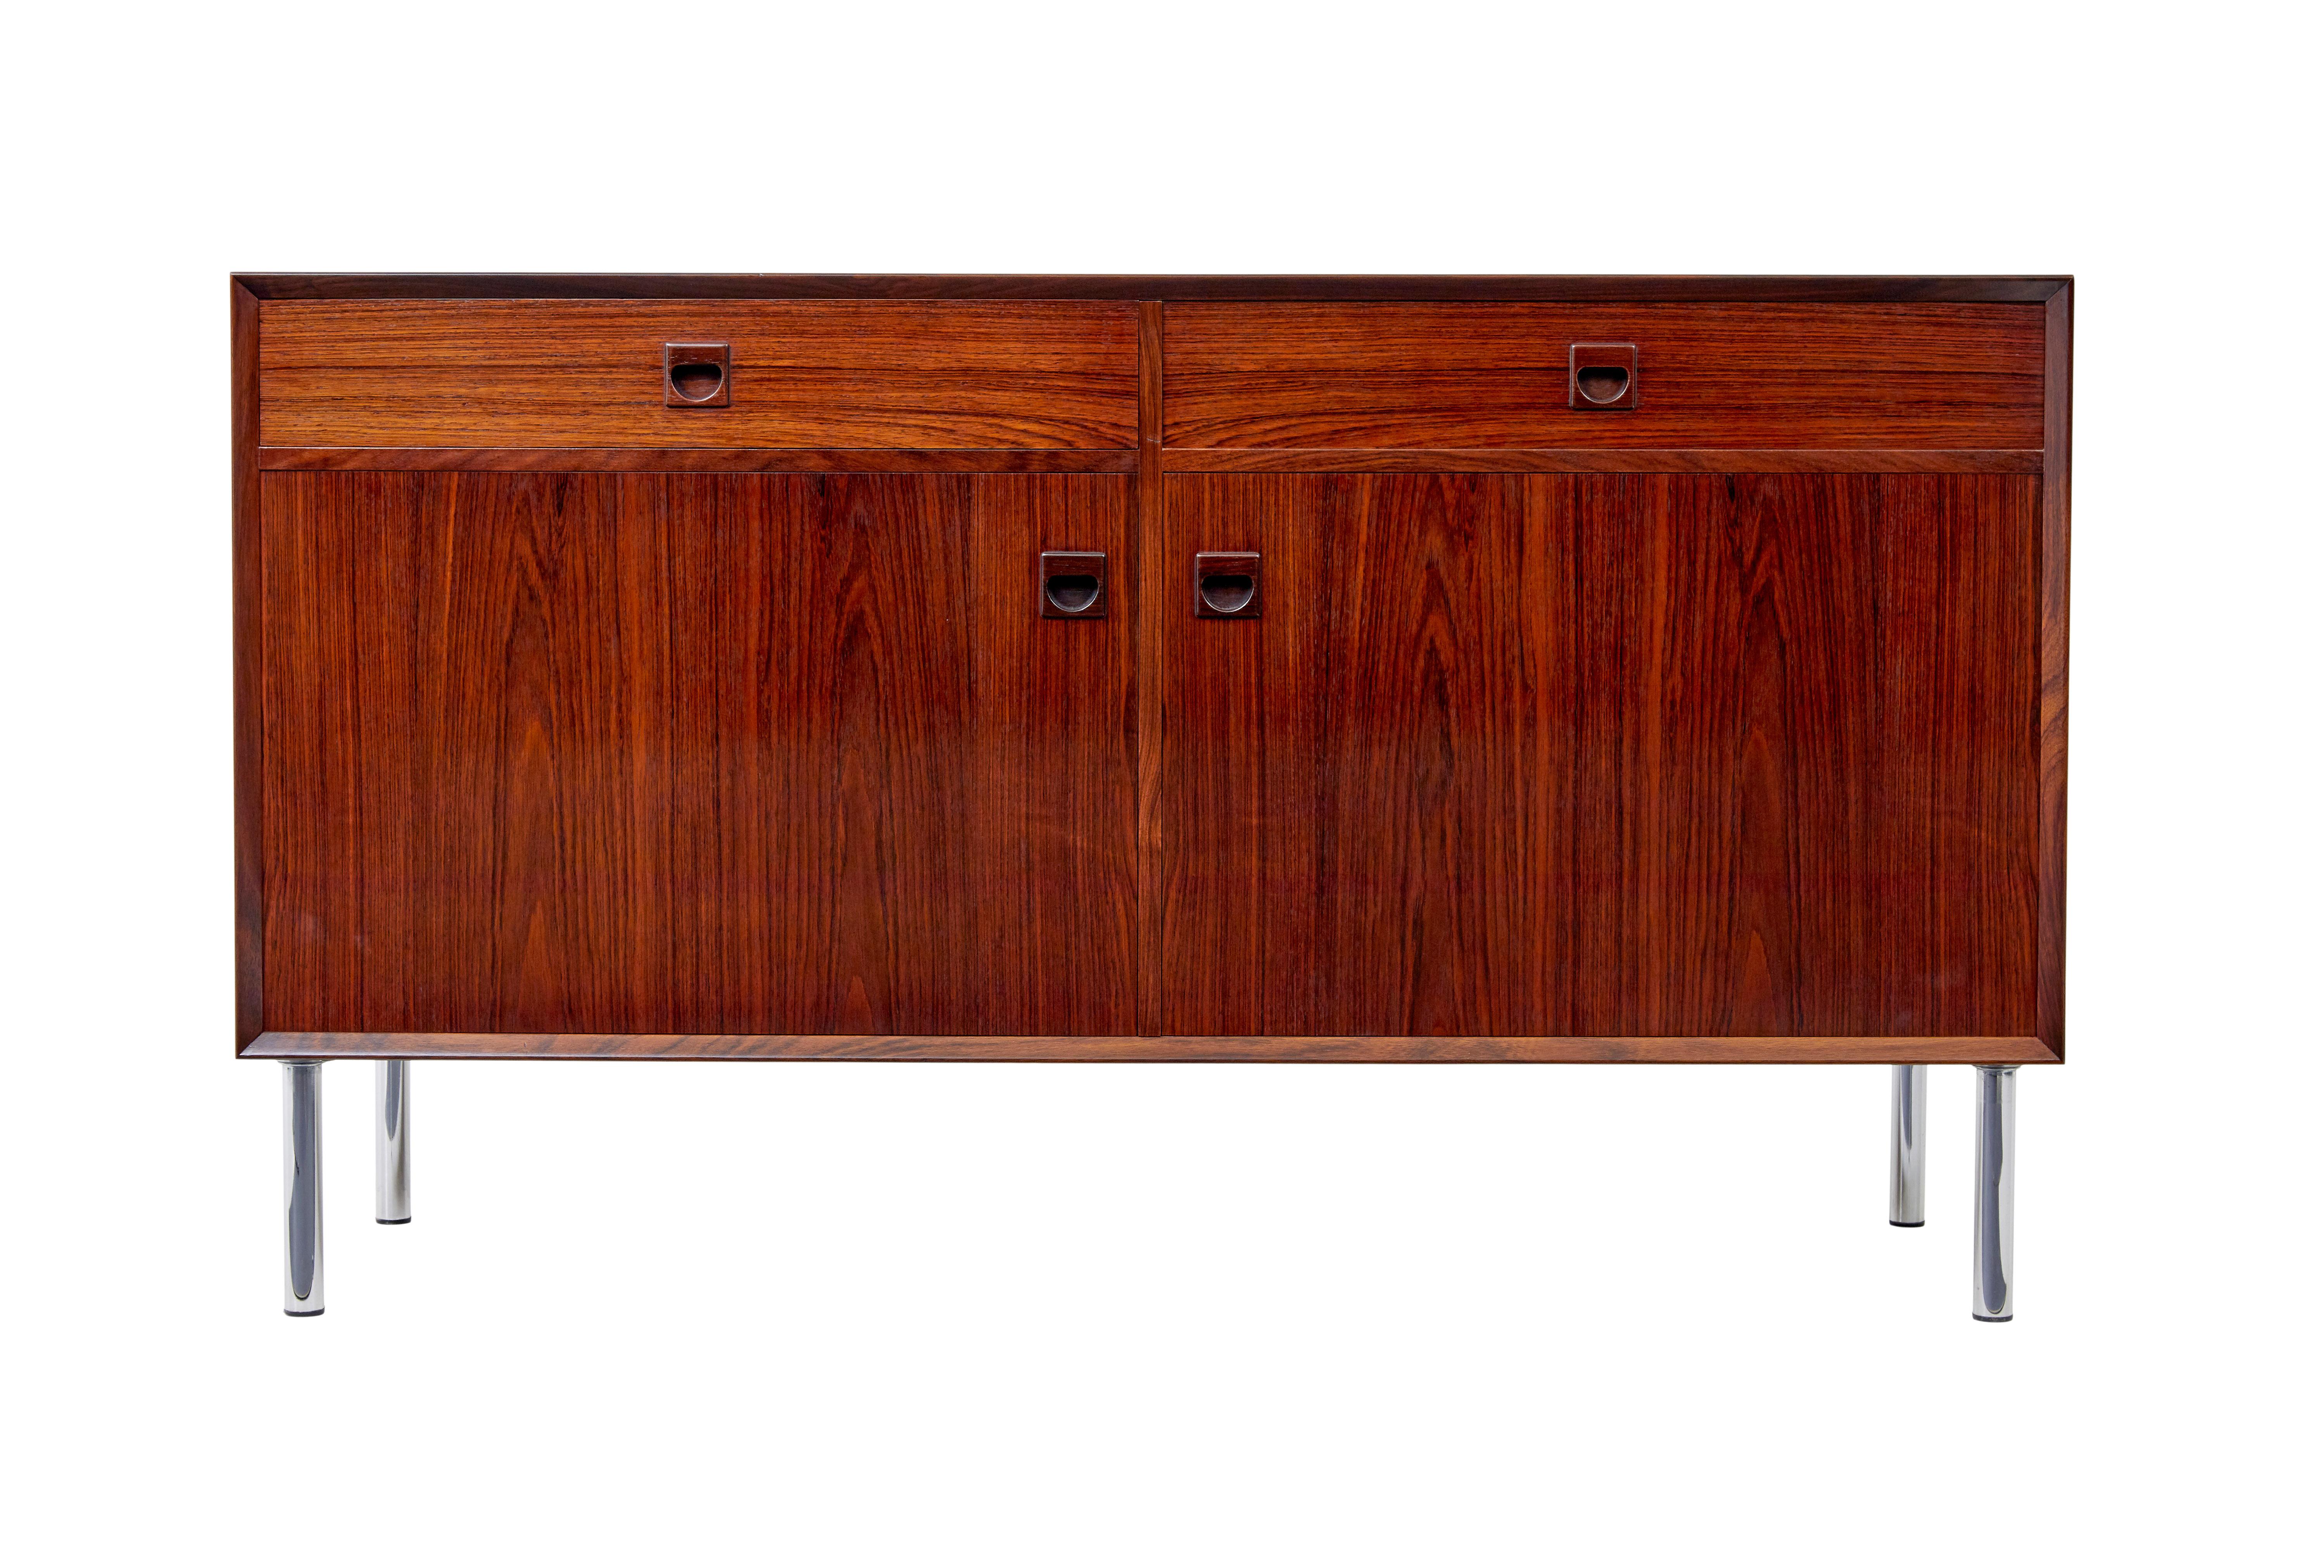 Mid century Danish Palisander buffet sideboard circa 1960.

Good quality palisander veneers used on this sideboard. 2 drawers below the top surface with solid inset handles. Double door cabinet below opens to interior which would have housed 2